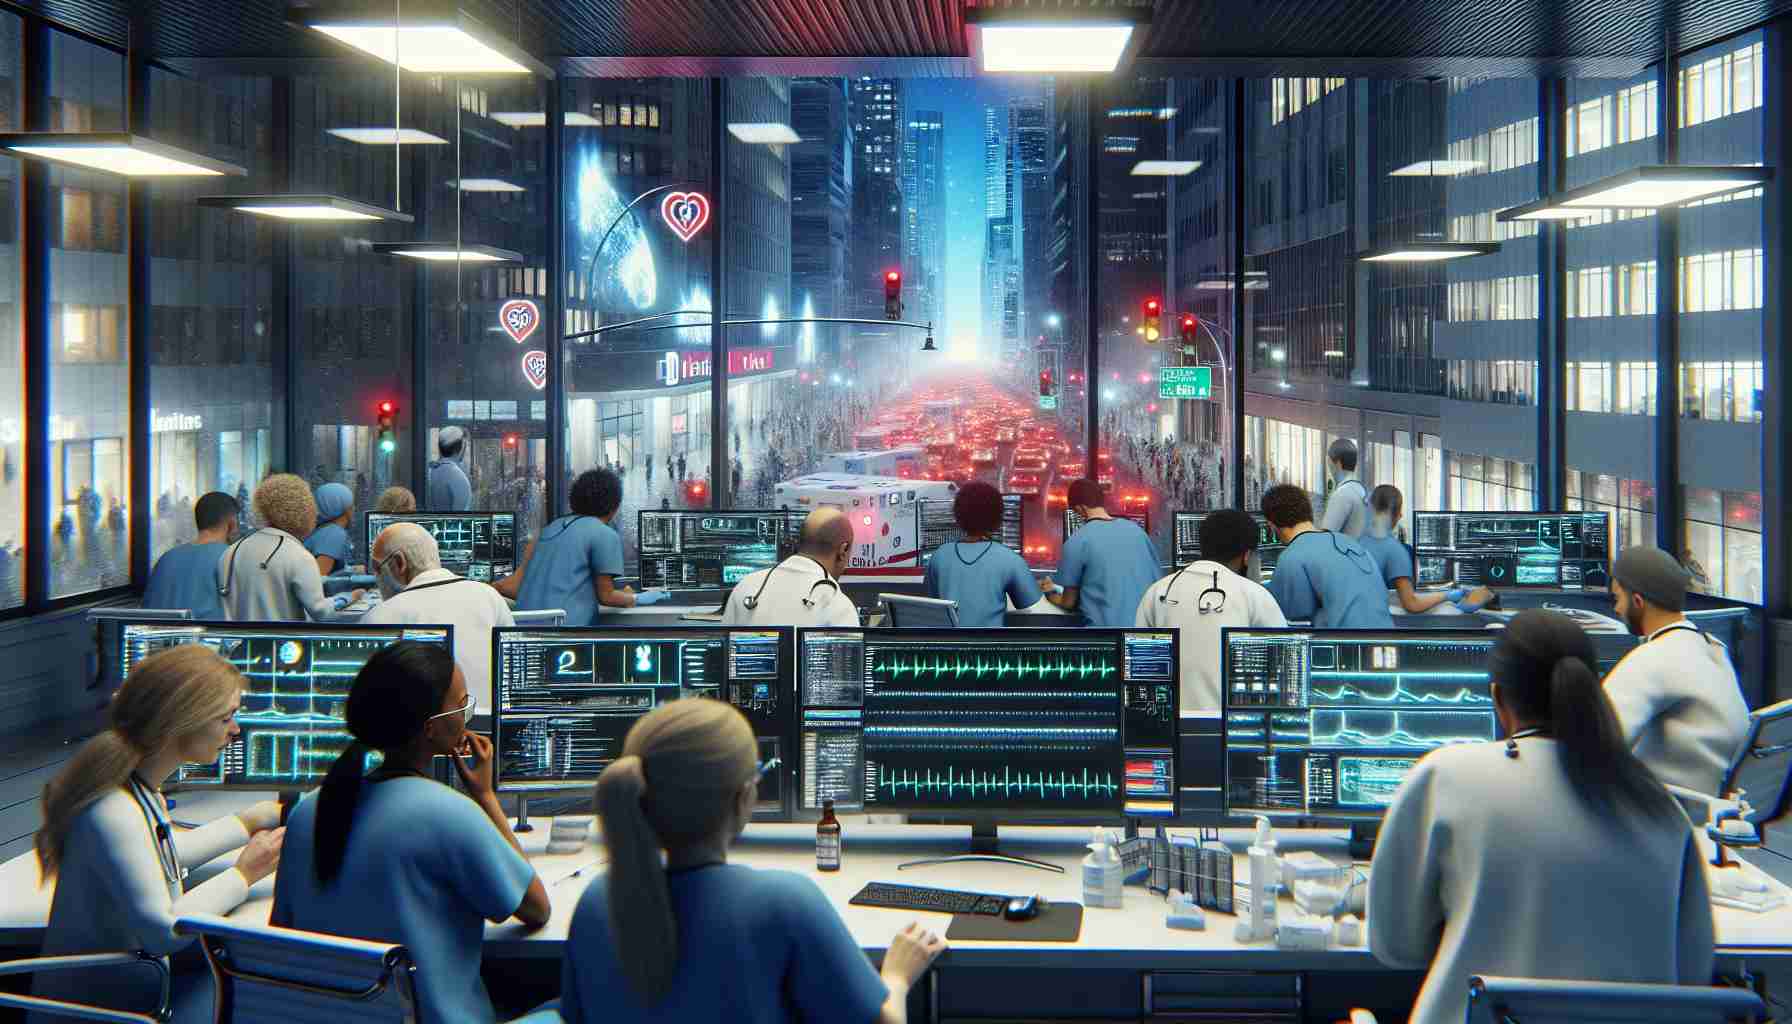 A realistic, high-definition image showing the impact of a global technology outage on healthcare services worldwide. The scene portrays a busy hospital emergency room with healthcare professionals of various genders and descents. The monitors are showing error messages and the lights are flickering, implying a large-scale technological disruption. In the background, through a window, a cityscape is visible, with traffic lights malfunctioning and electronic billboards displaying error screens, emphasizing the global scale of the issue.